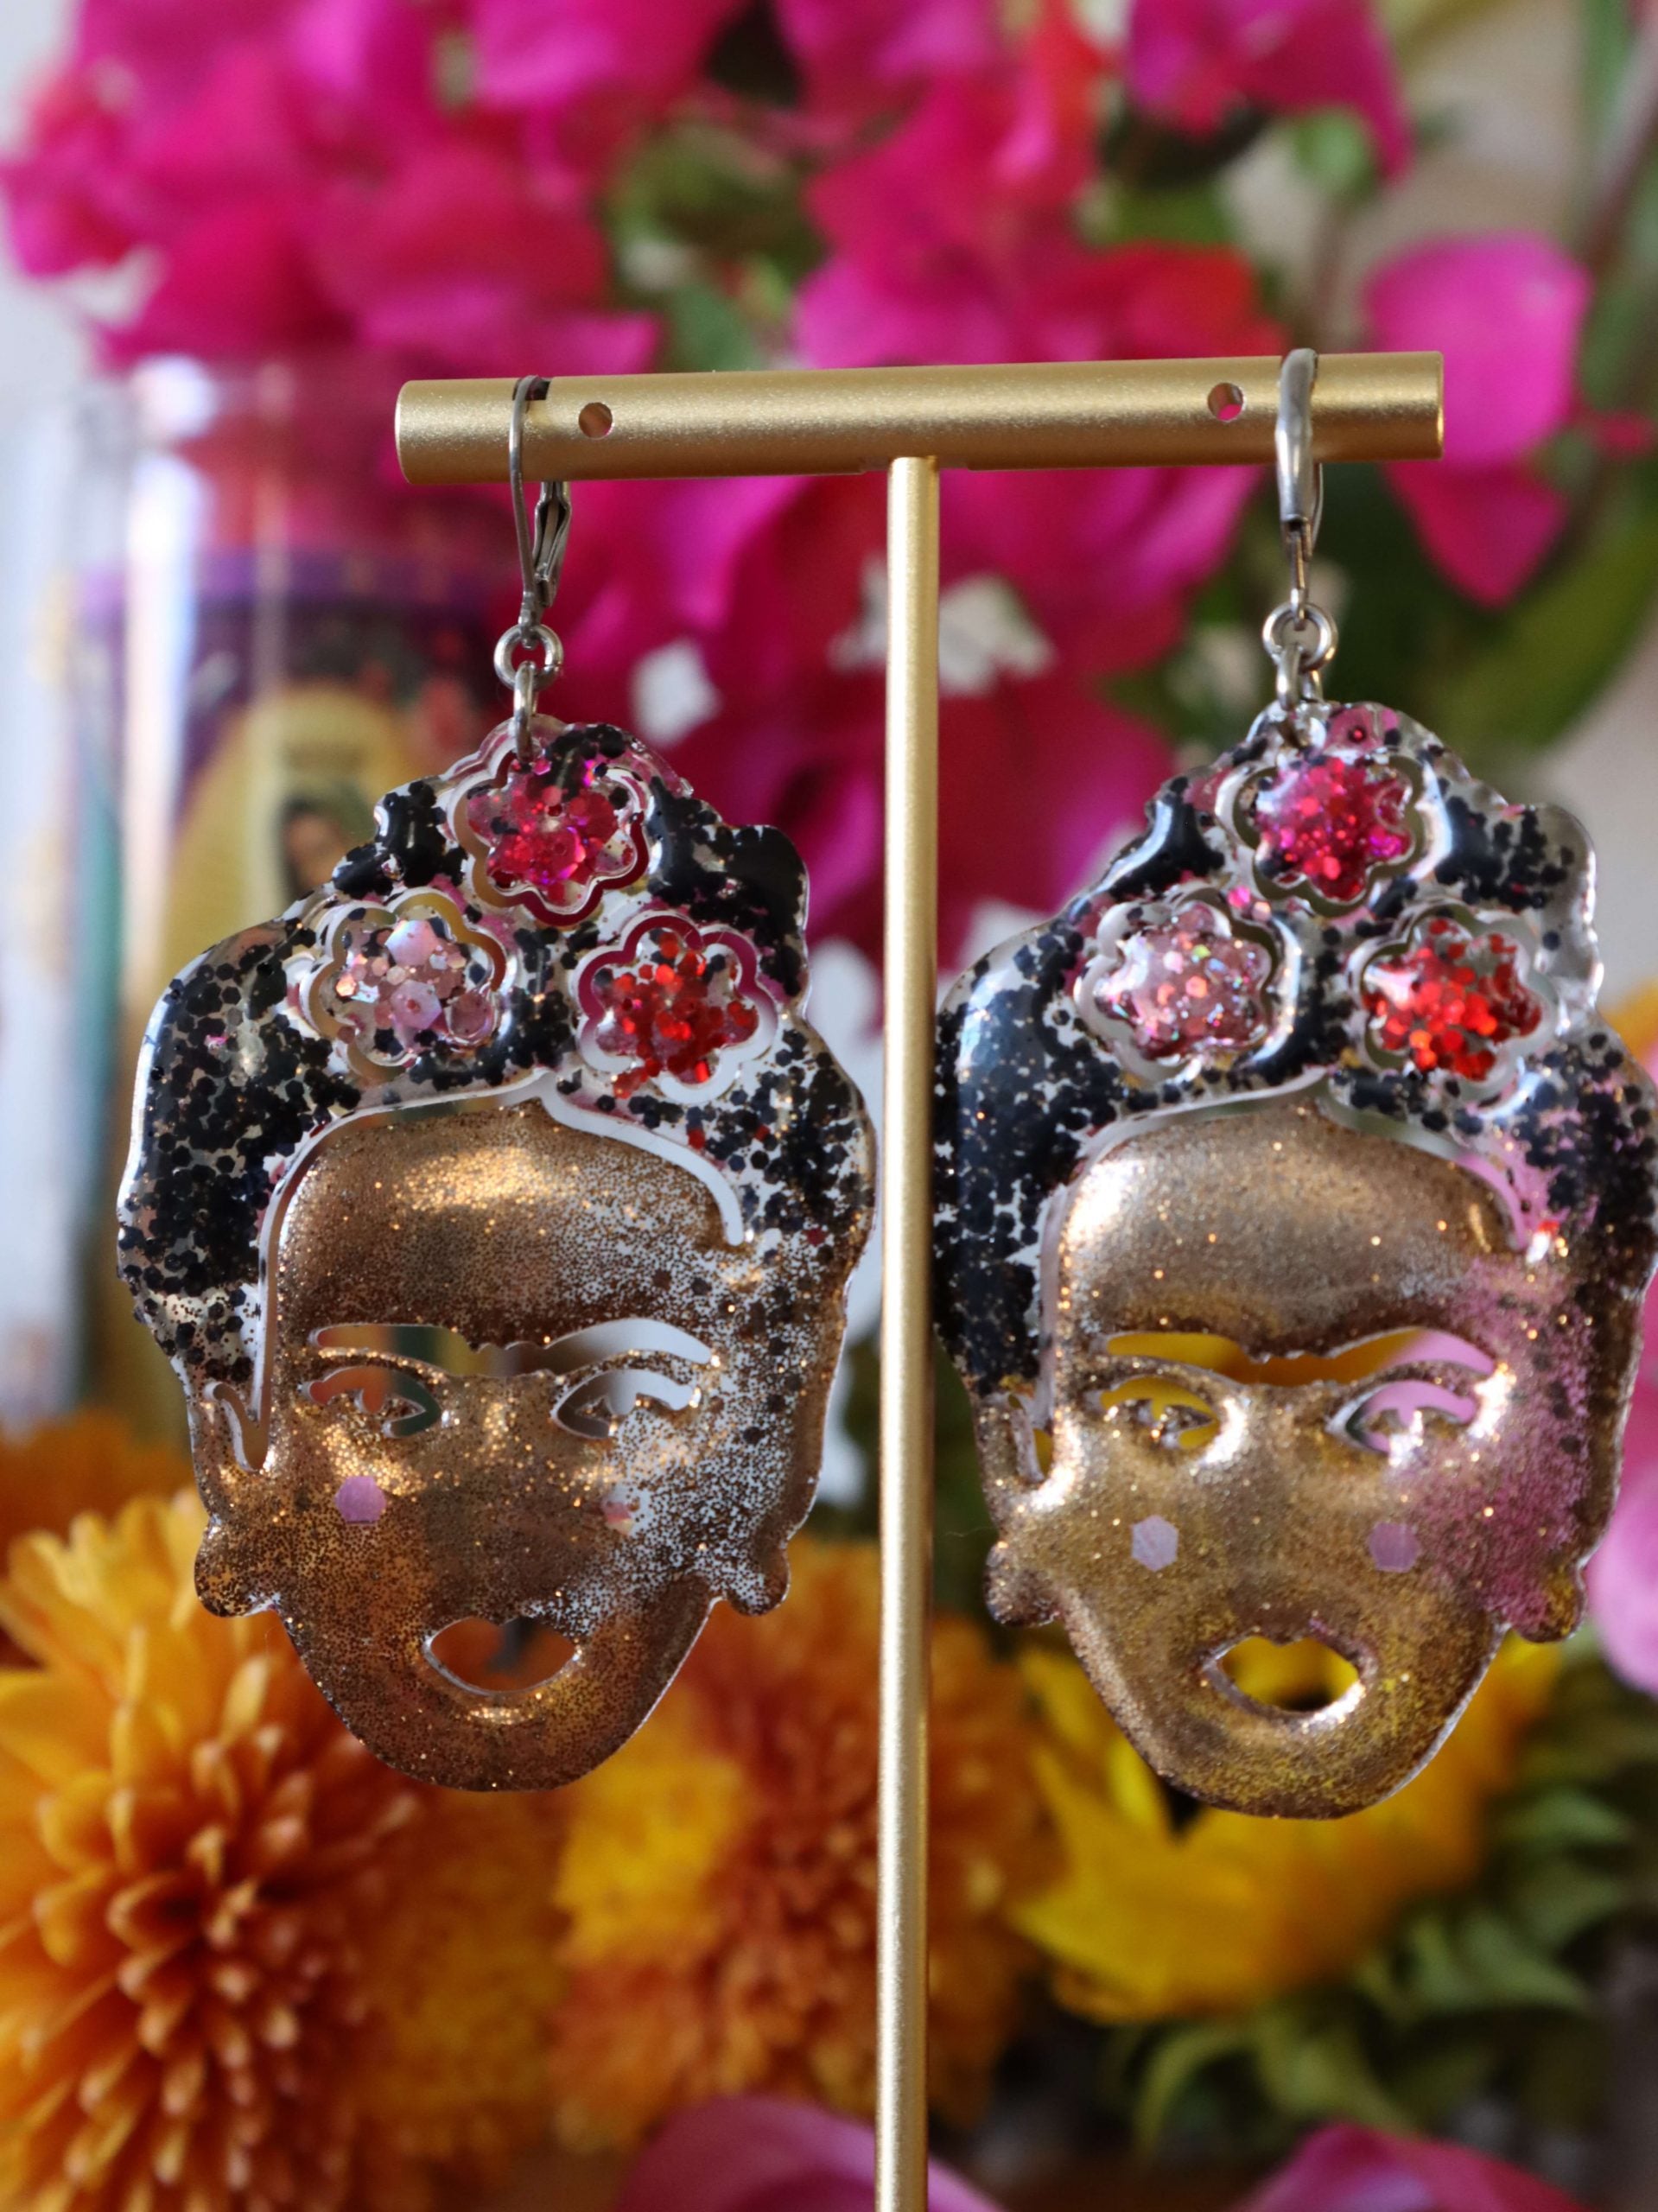 resin-frida-kahlo-earrings-by-kaleidoscopes-and-polka-dots-front-viewEarrings - Glittery Mexican Artist Earrings